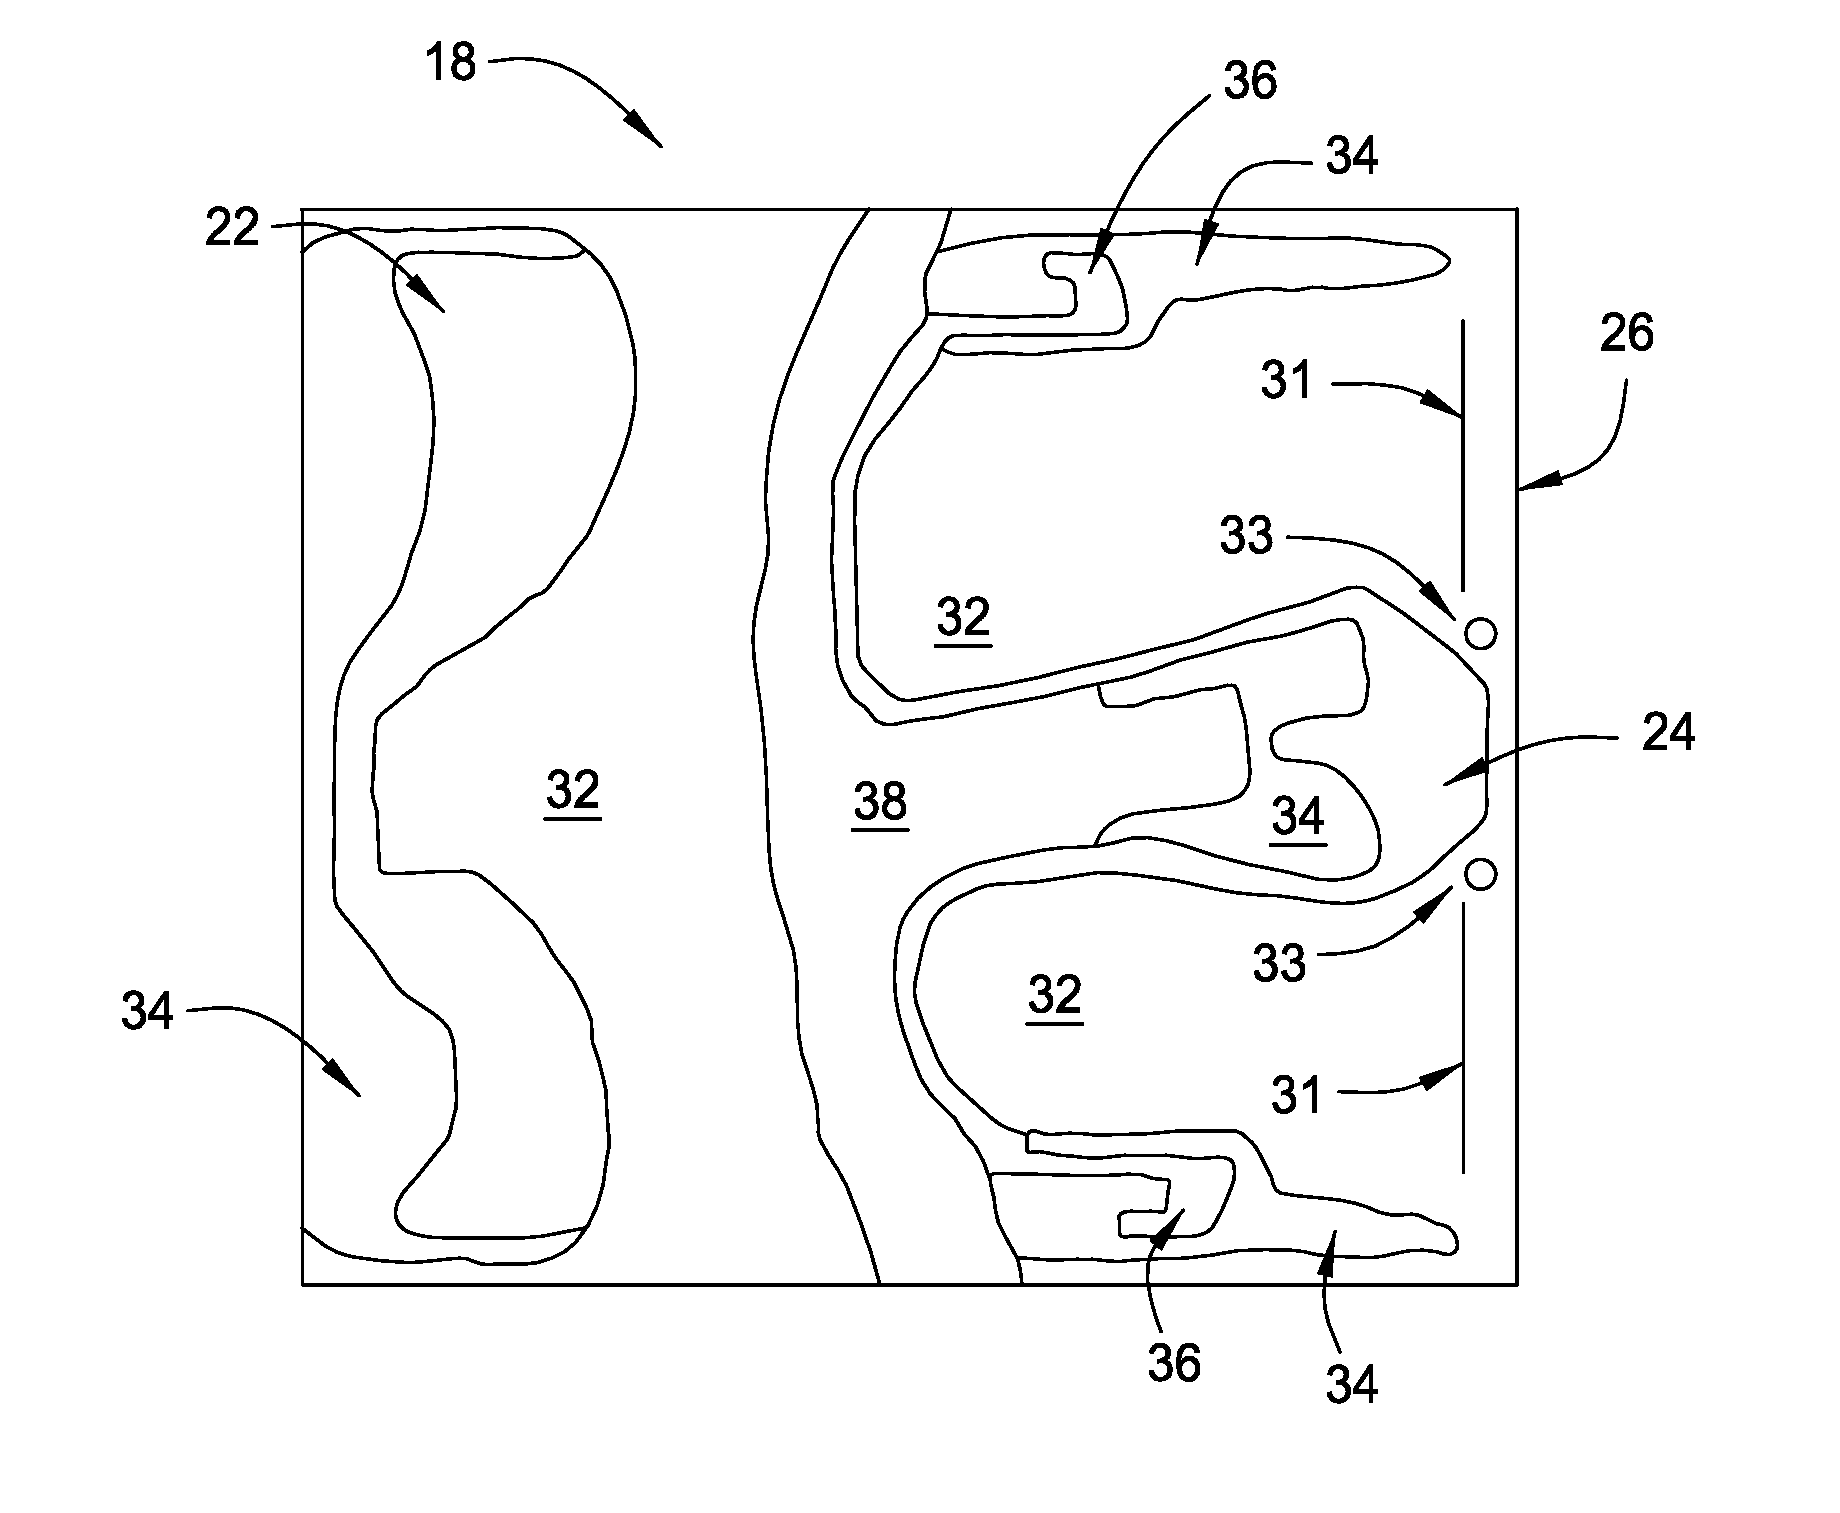 ABS with lubricant control trenches for hard disk drives